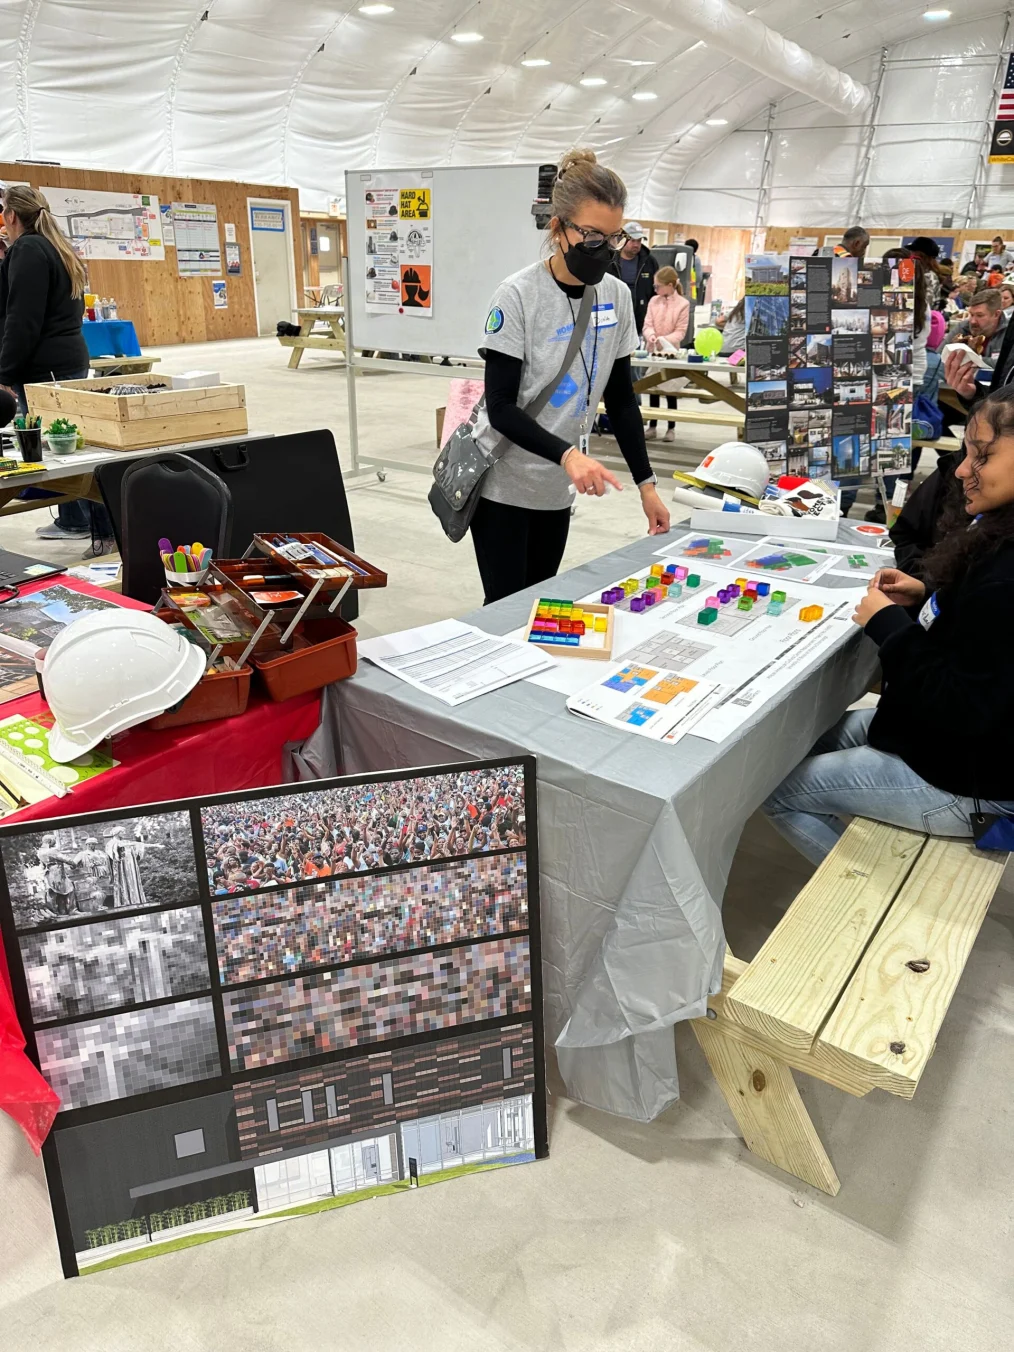 Dina Griffin stands behind a table at the Lakeside Alliance “Who Builds the World? GIRLS!” event. She is wearing a mask, glasses, and gray t-shirt as she explains a diagram to a young woman sitting at the table. On the table are rainbow colored cubes and architectural designs. 